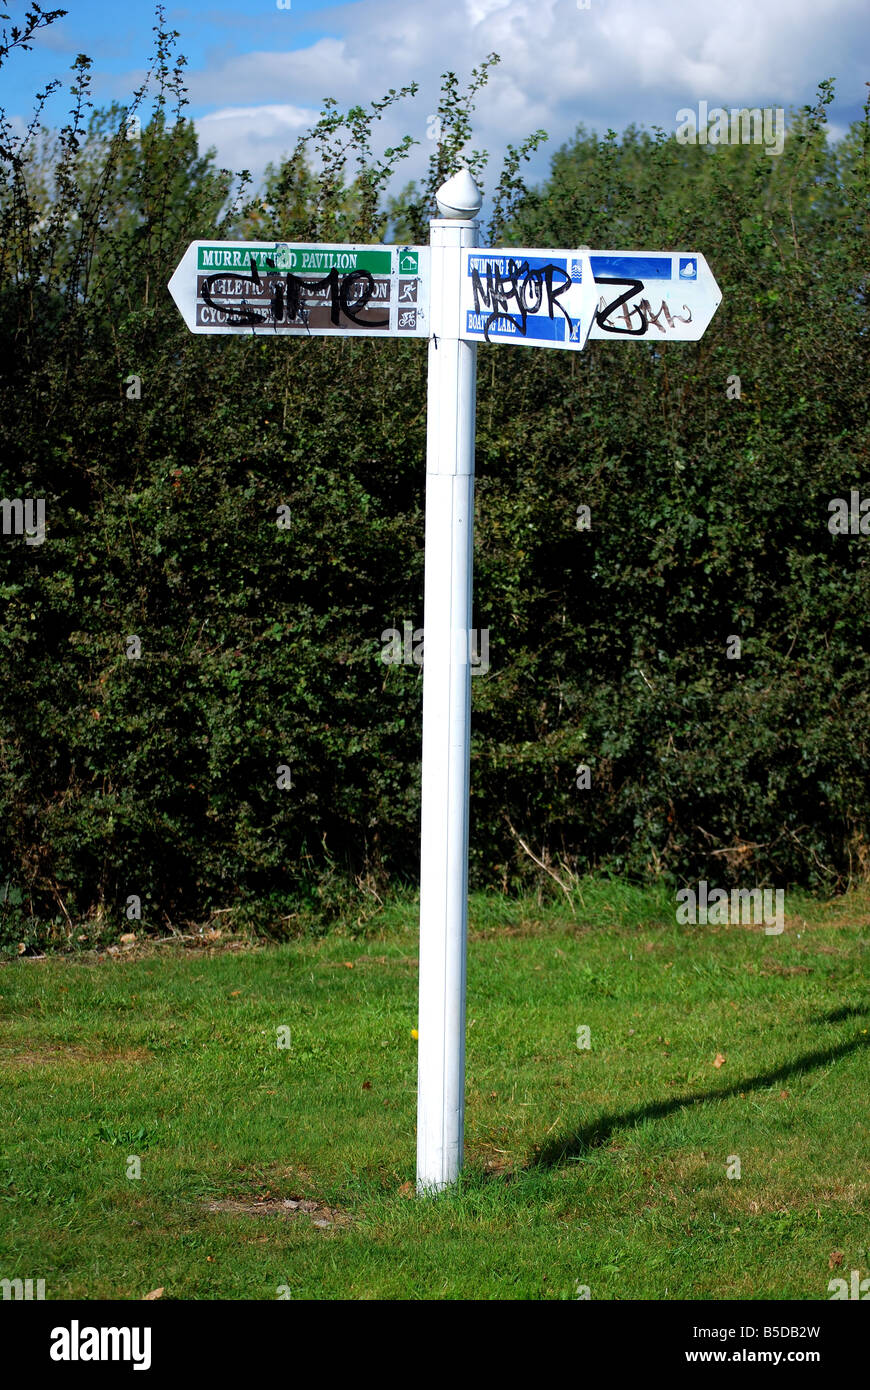 sign post graffitied Stock Photo